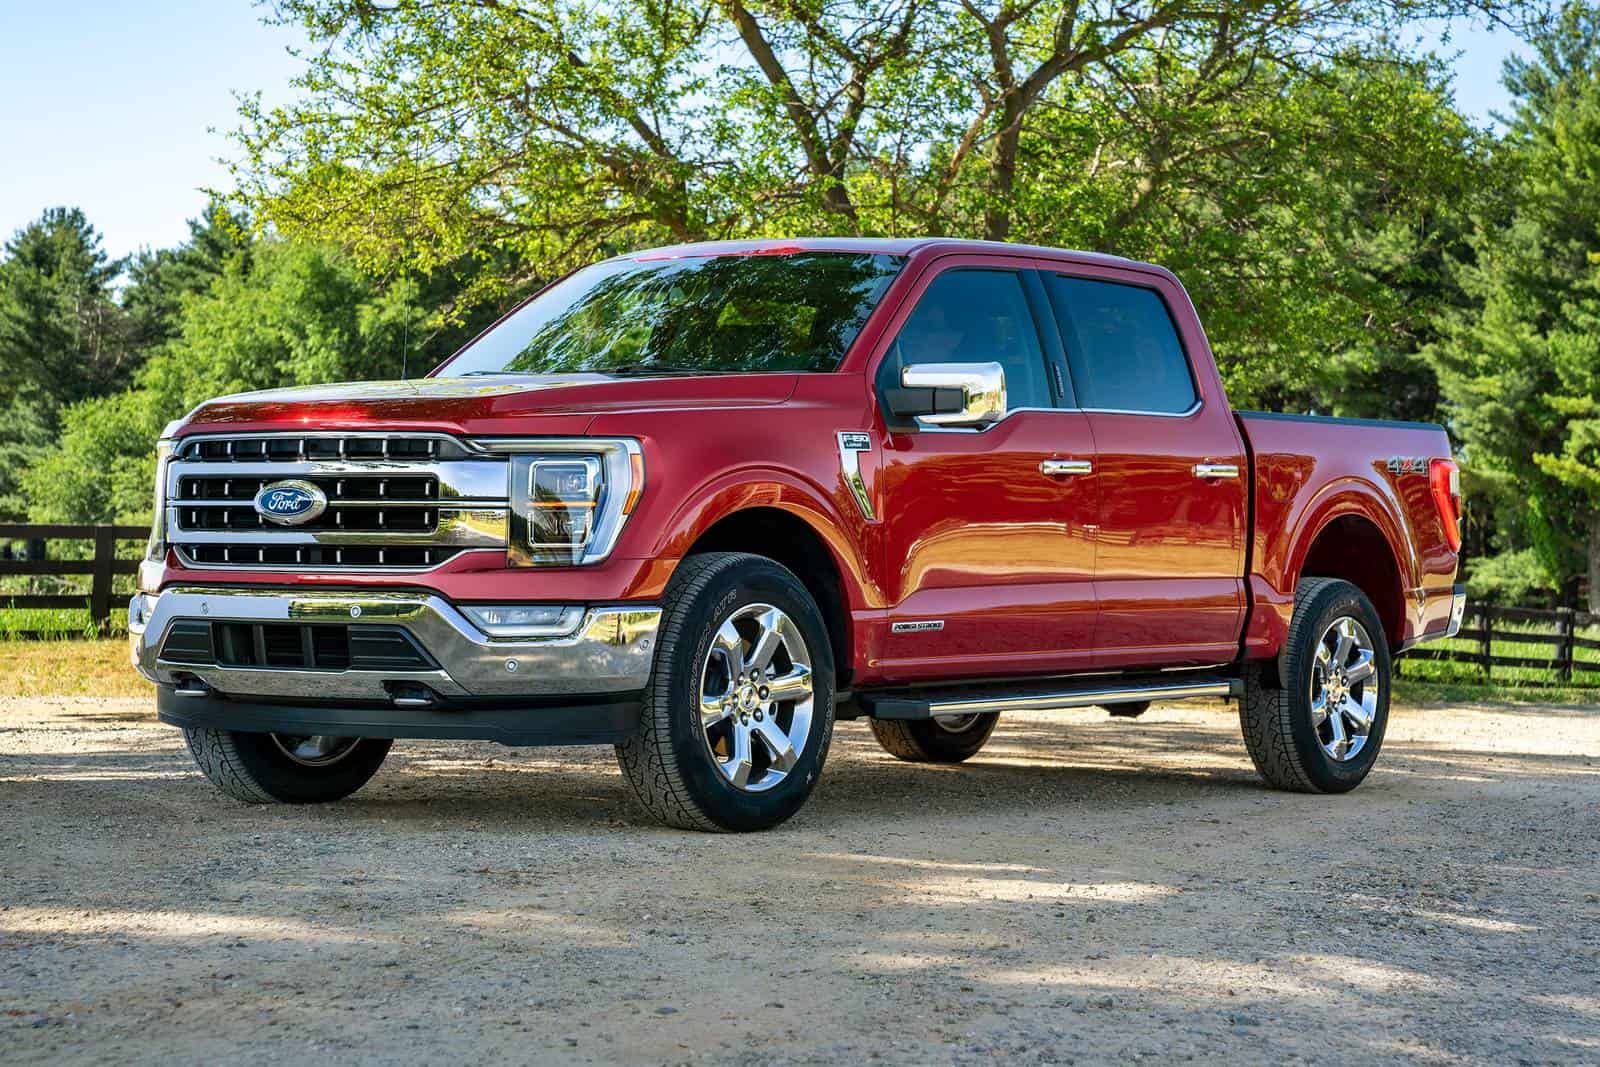 Ford F-Collection nonetheless #1 in truck gross sales; Oshawa-made Silverado and Sierra take #3 and #4 spots